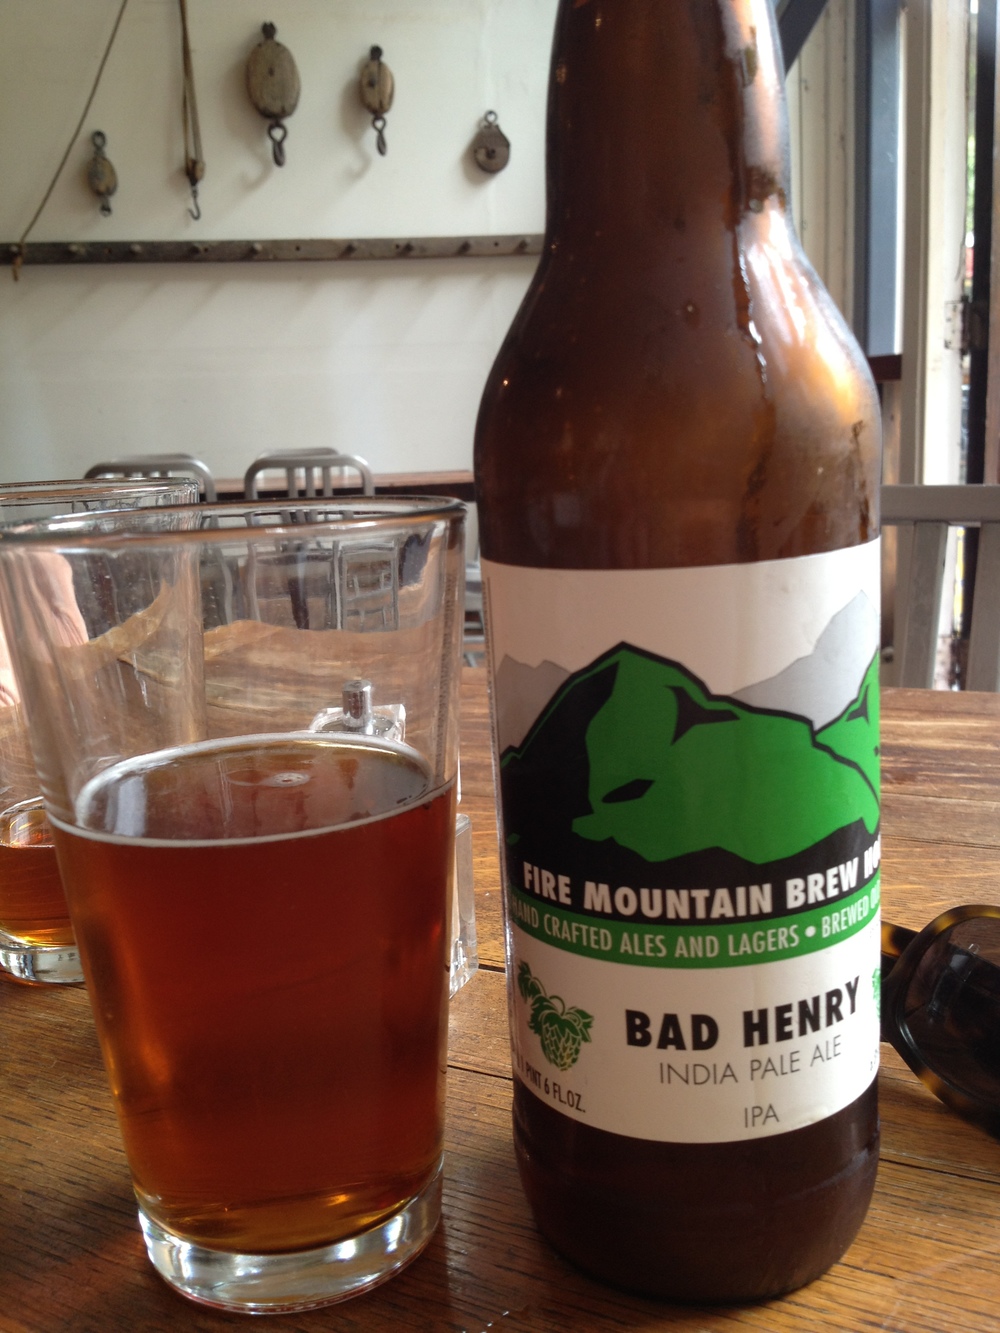  Best beer of the trip: Bad Henry IPA by Fire Mountain Brewery in Carlton, Oregon  